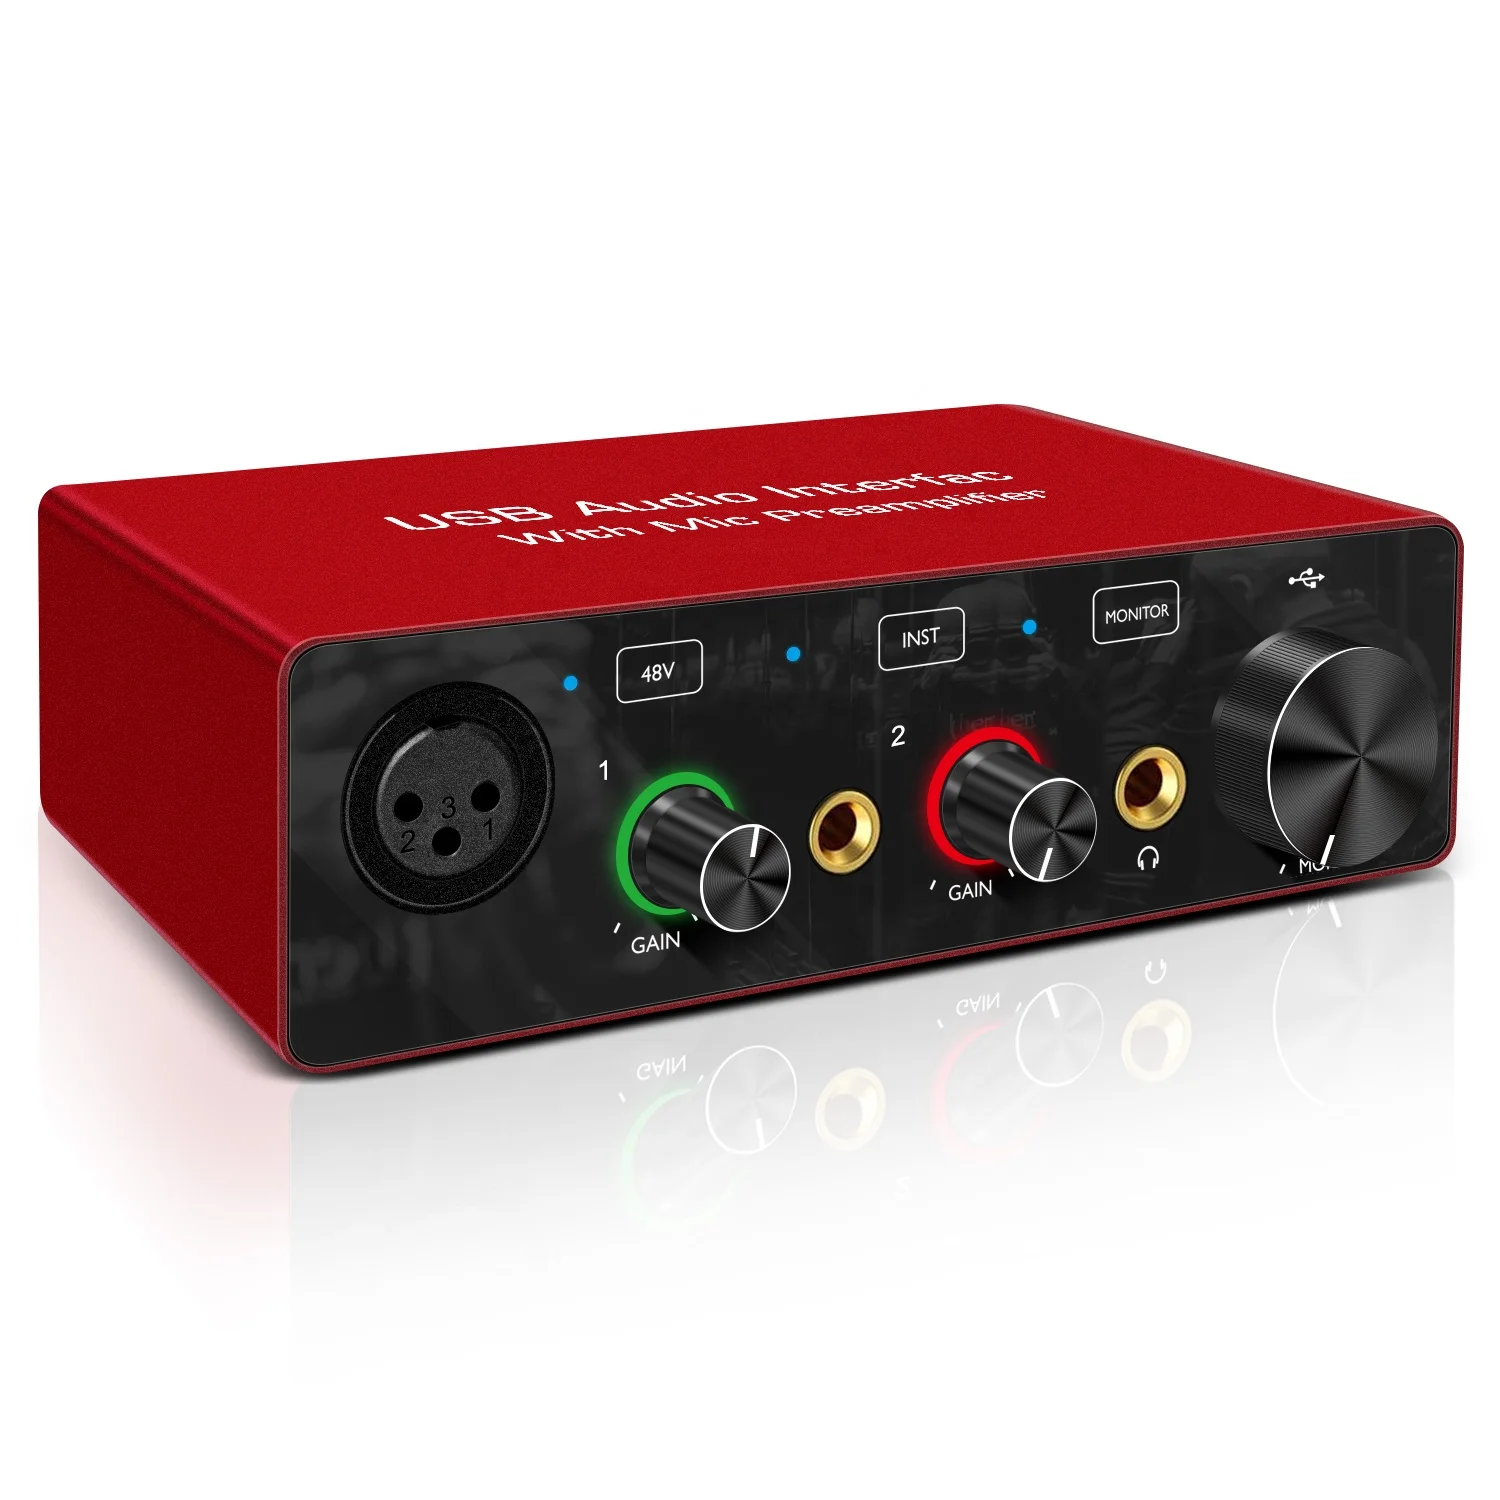 Wholesale 48V power 2-IN, 2-OUT USB Audio Interface with preamplifier From m.alibaba.com